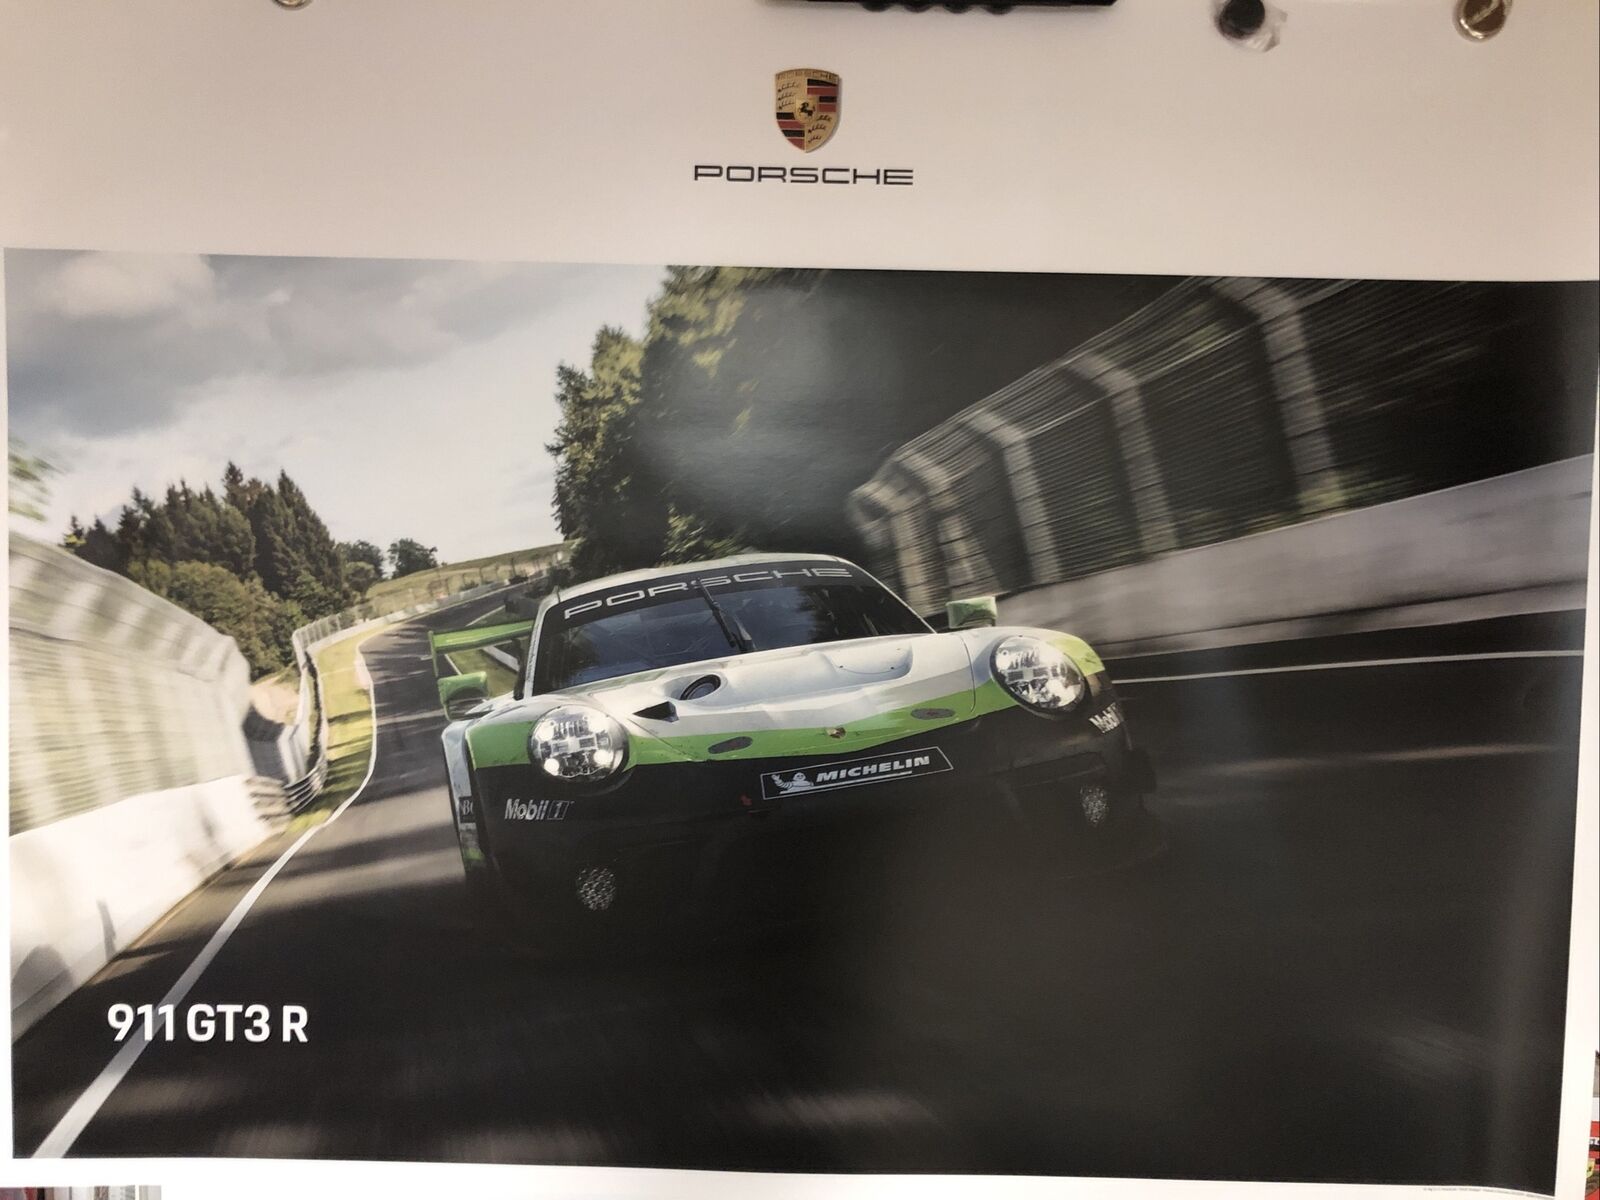 AWESOME 2019 Porsche 911 GT3 R Coupe Showroom Advertising Poster 